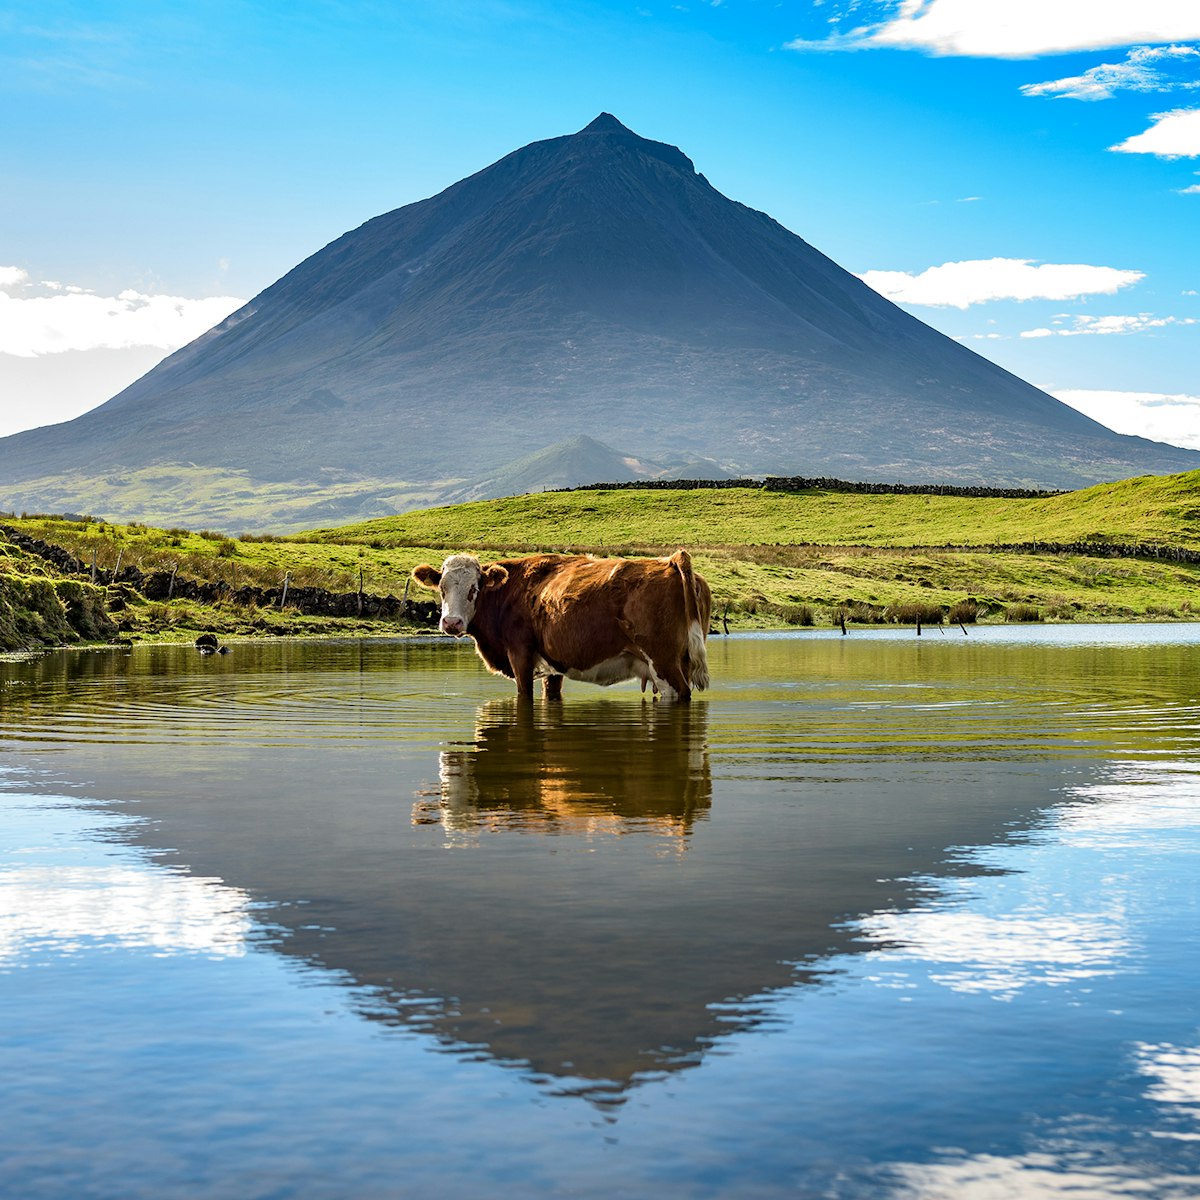 Mount Pico and a cow standing in water, reflected in a nearby lake; Shutterstock ID 378069745; Your name (First / Last): James Kay; GL account no.: 65050; Netsuite department name: Online Editorial; Full Product or Project name including edition: Azores destination page highlights